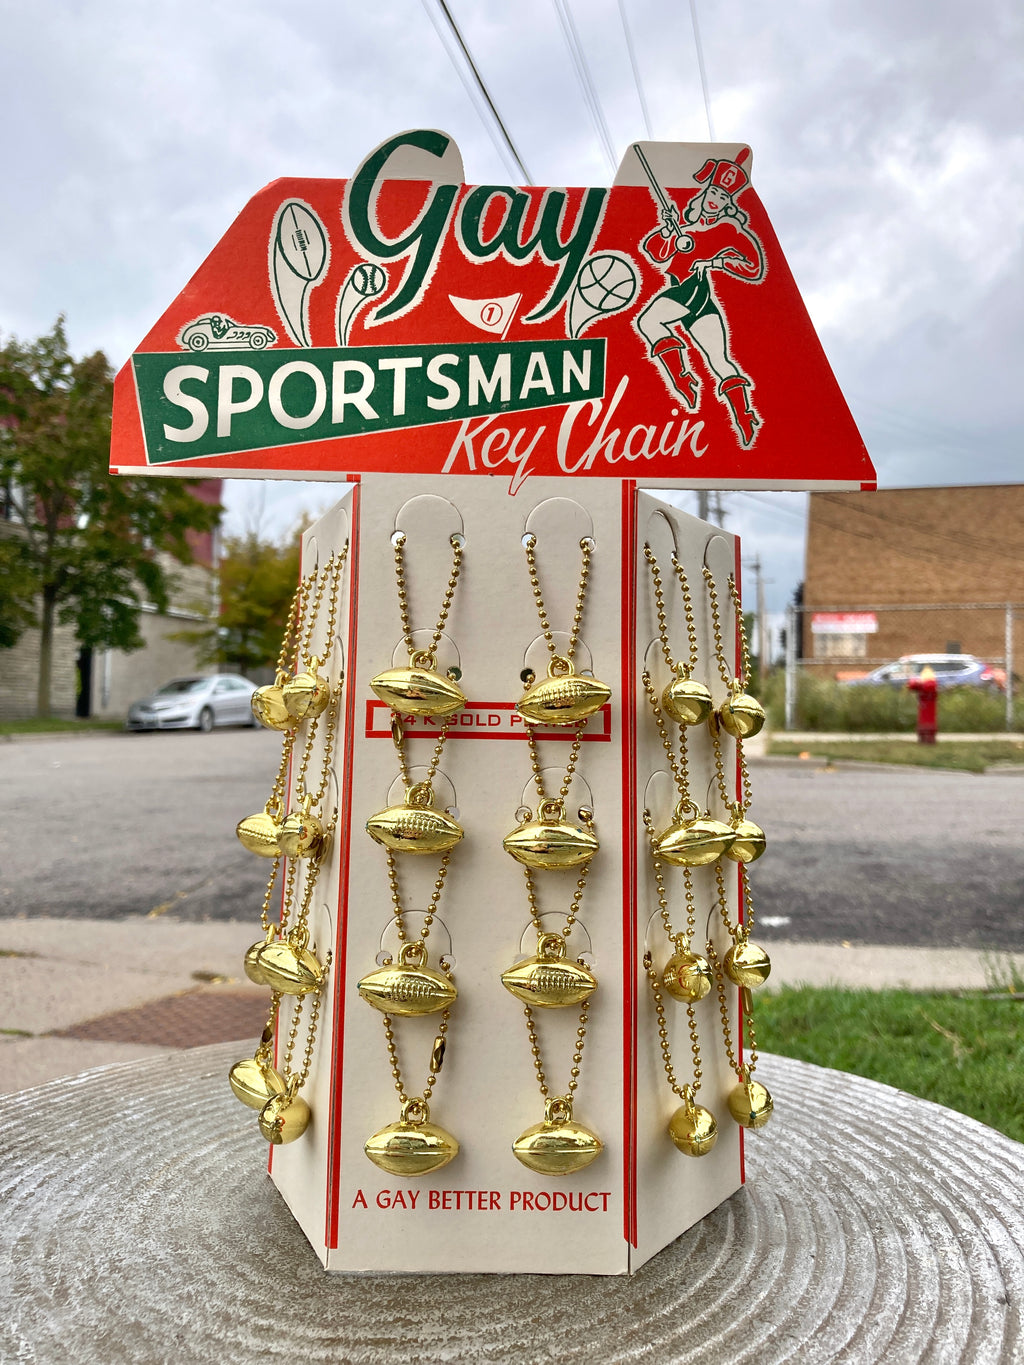 1950s, "Genuine Gay Products" Gay Sportsman Key Chain Store Display!  A Guaranteed Gay Product!